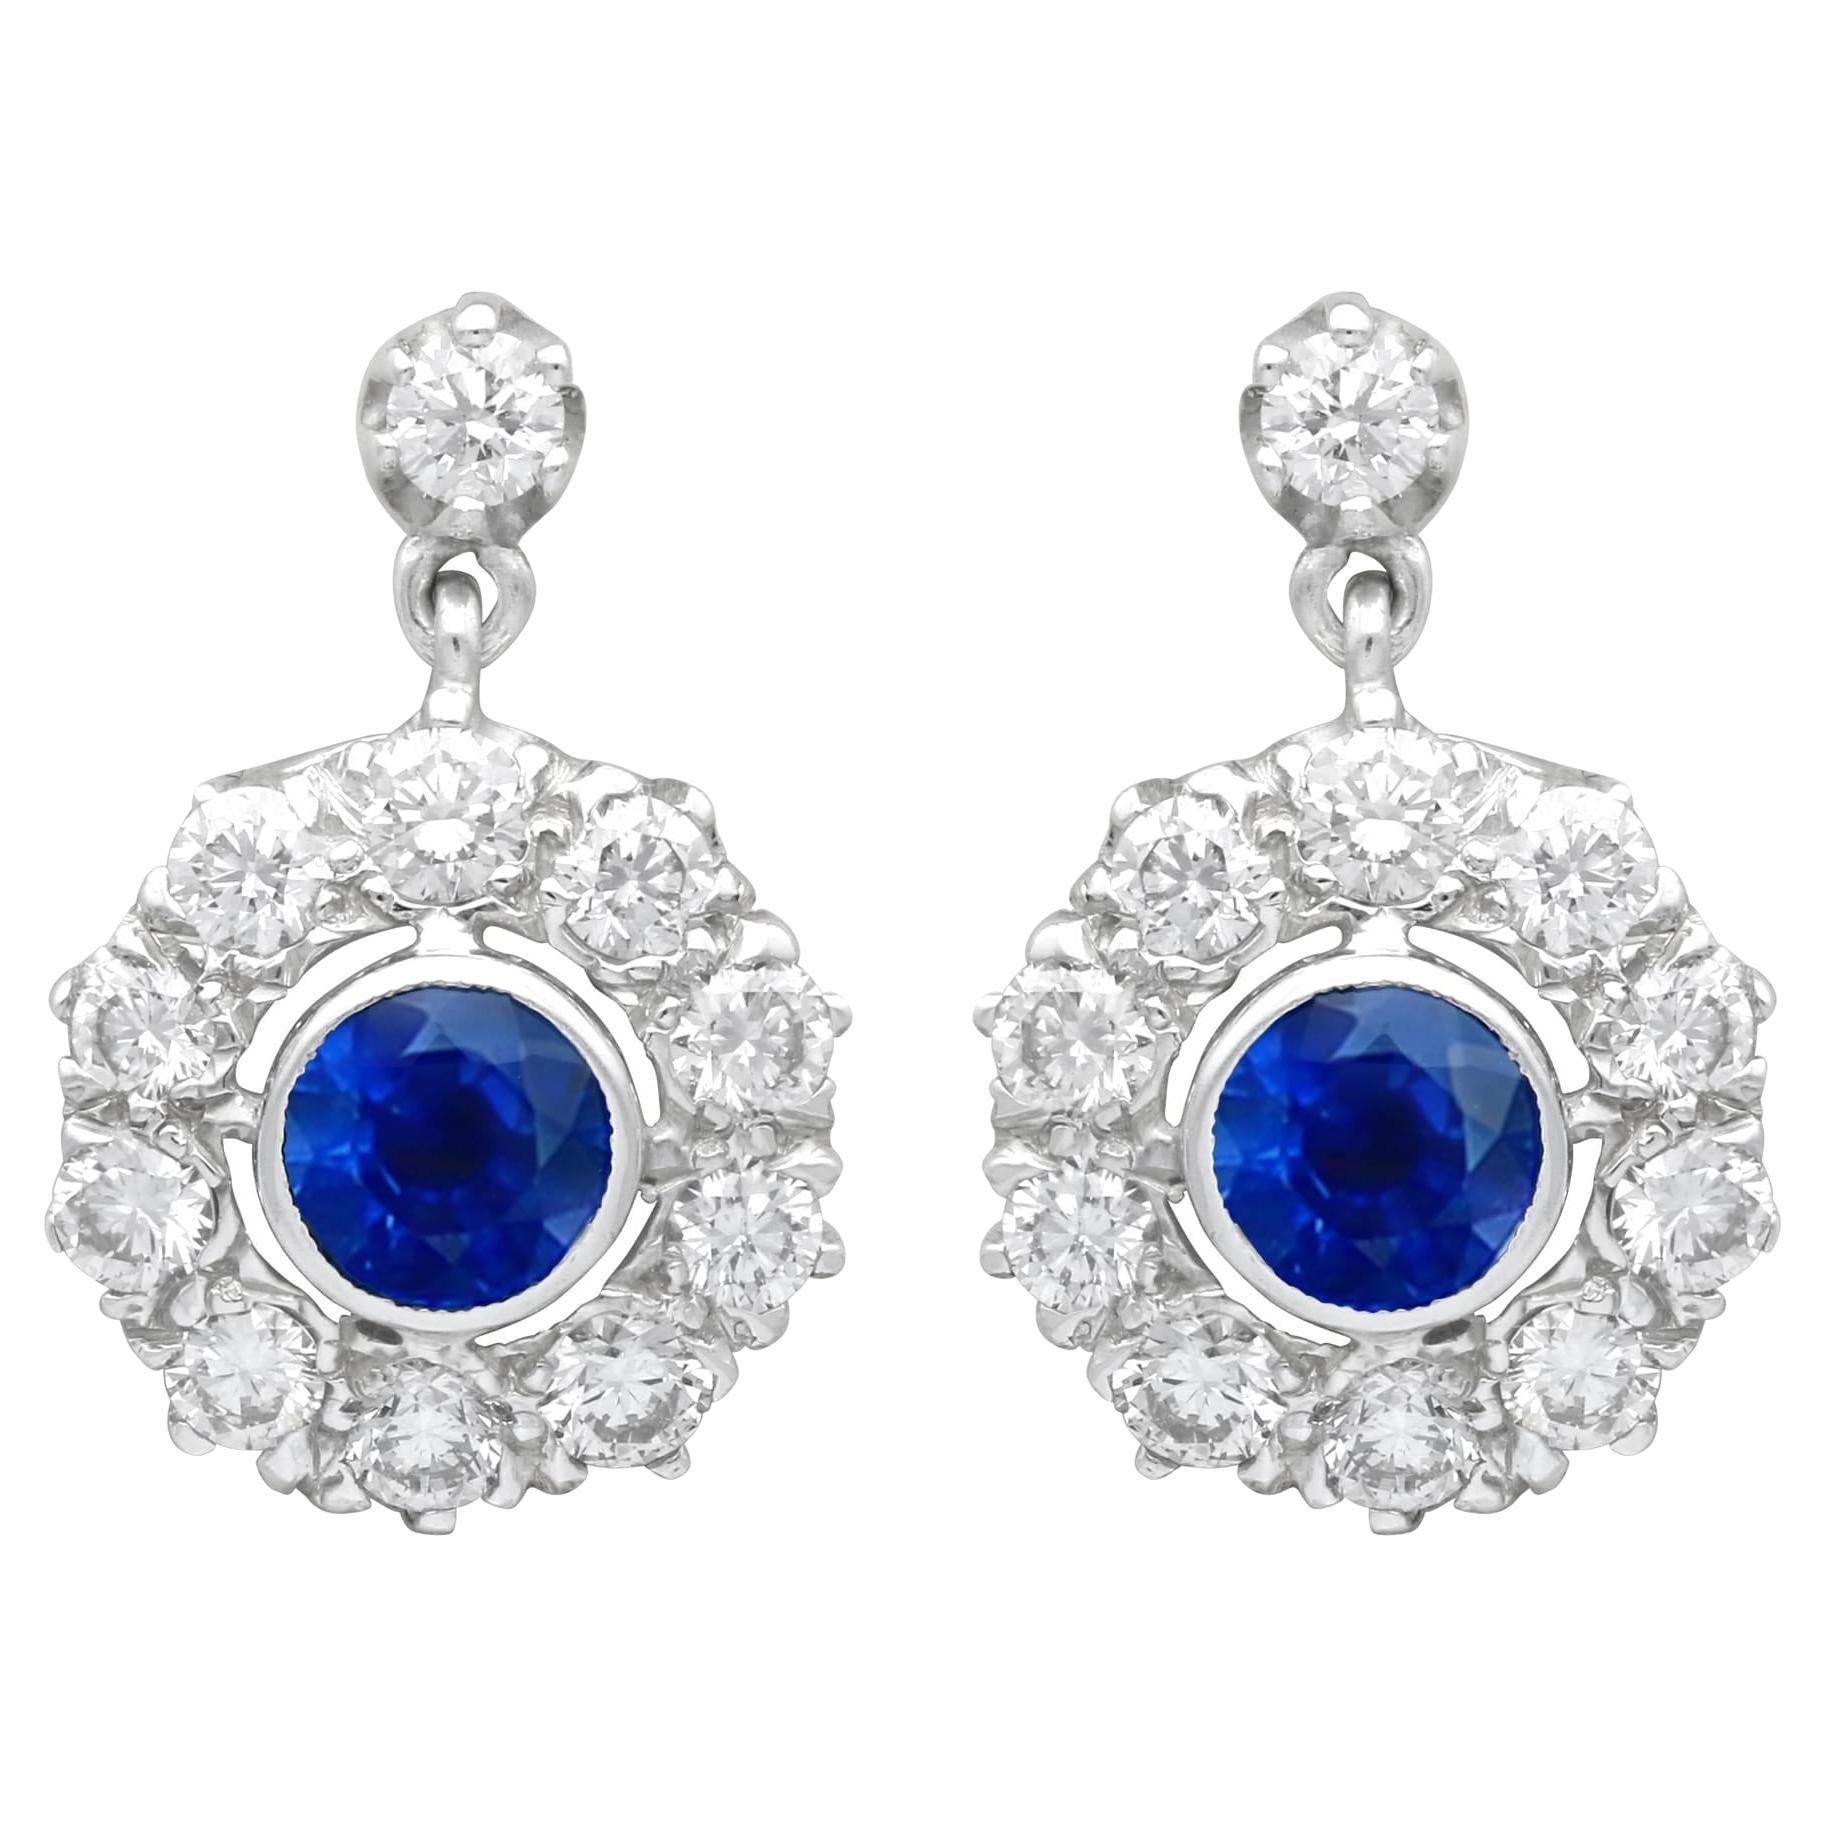 Antique 1 Carat Sapphire and 1.98 Carat Diamond 18k Yellow Gold Drop Earrings For Sale